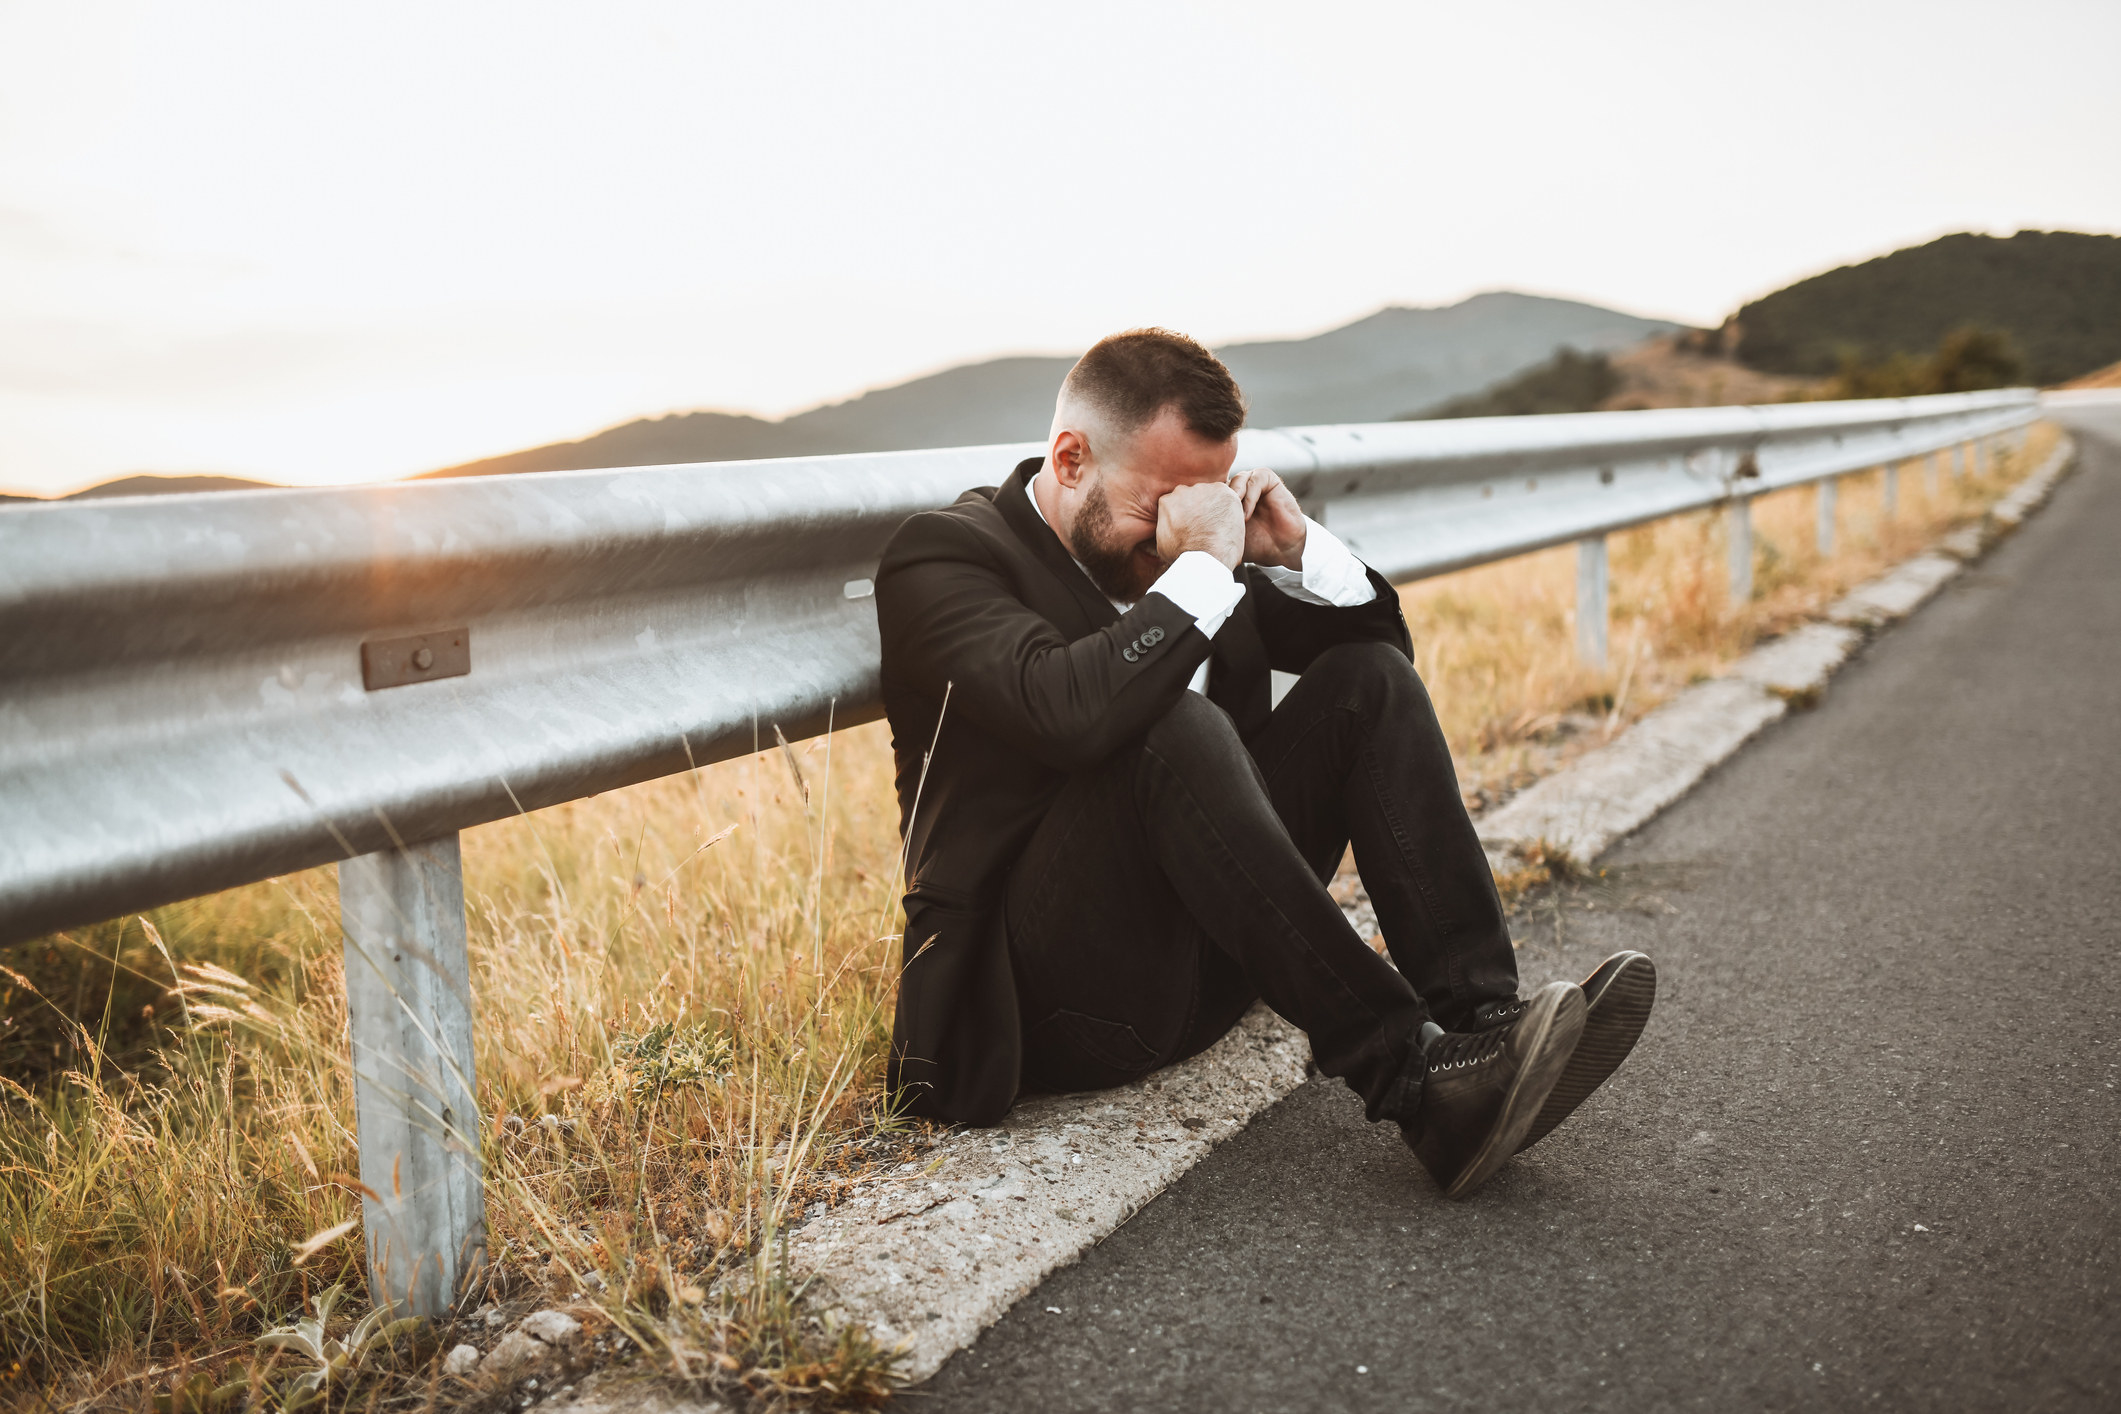 A man in a suit crying by the side of the road